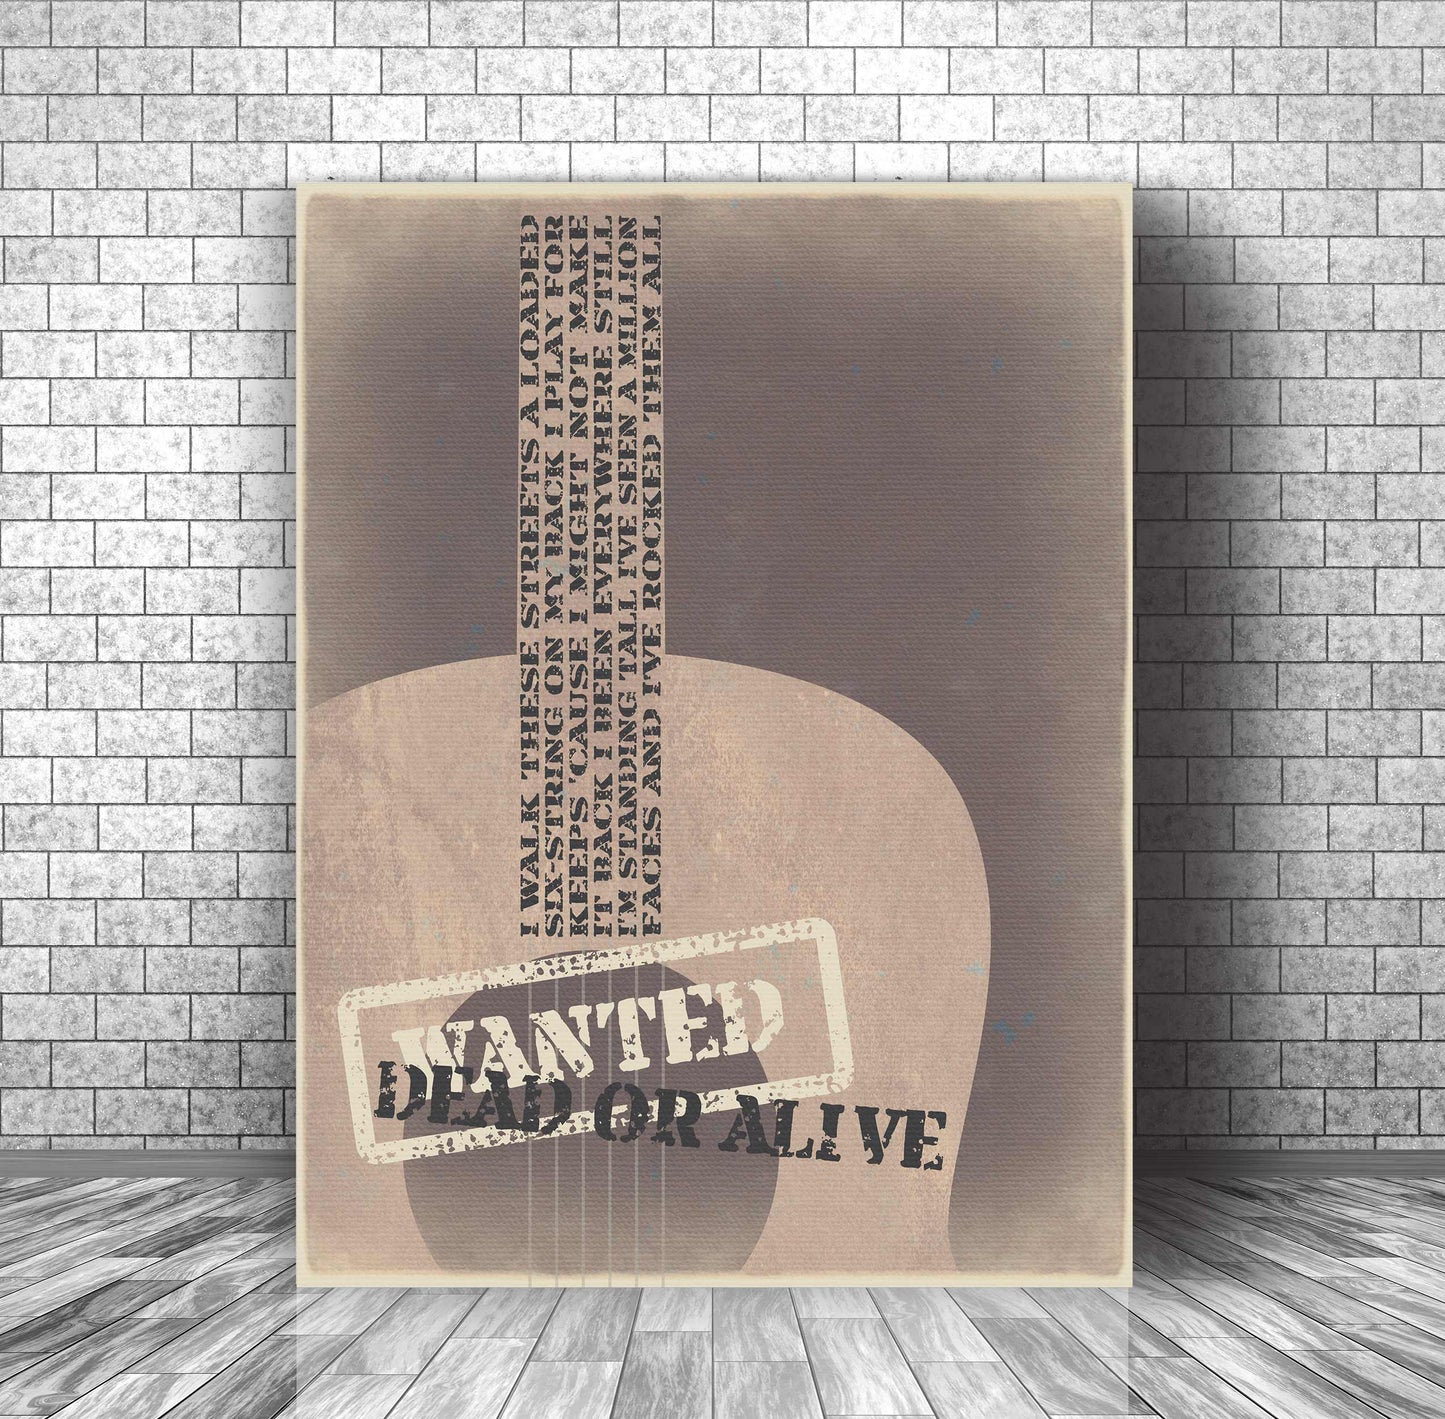 Wanted Dead or Alive Bon Jovi - Song Lyric Wall Print Decor Song Lyrics Art Song Lyrics Art 11x14 Canvas Wrap 